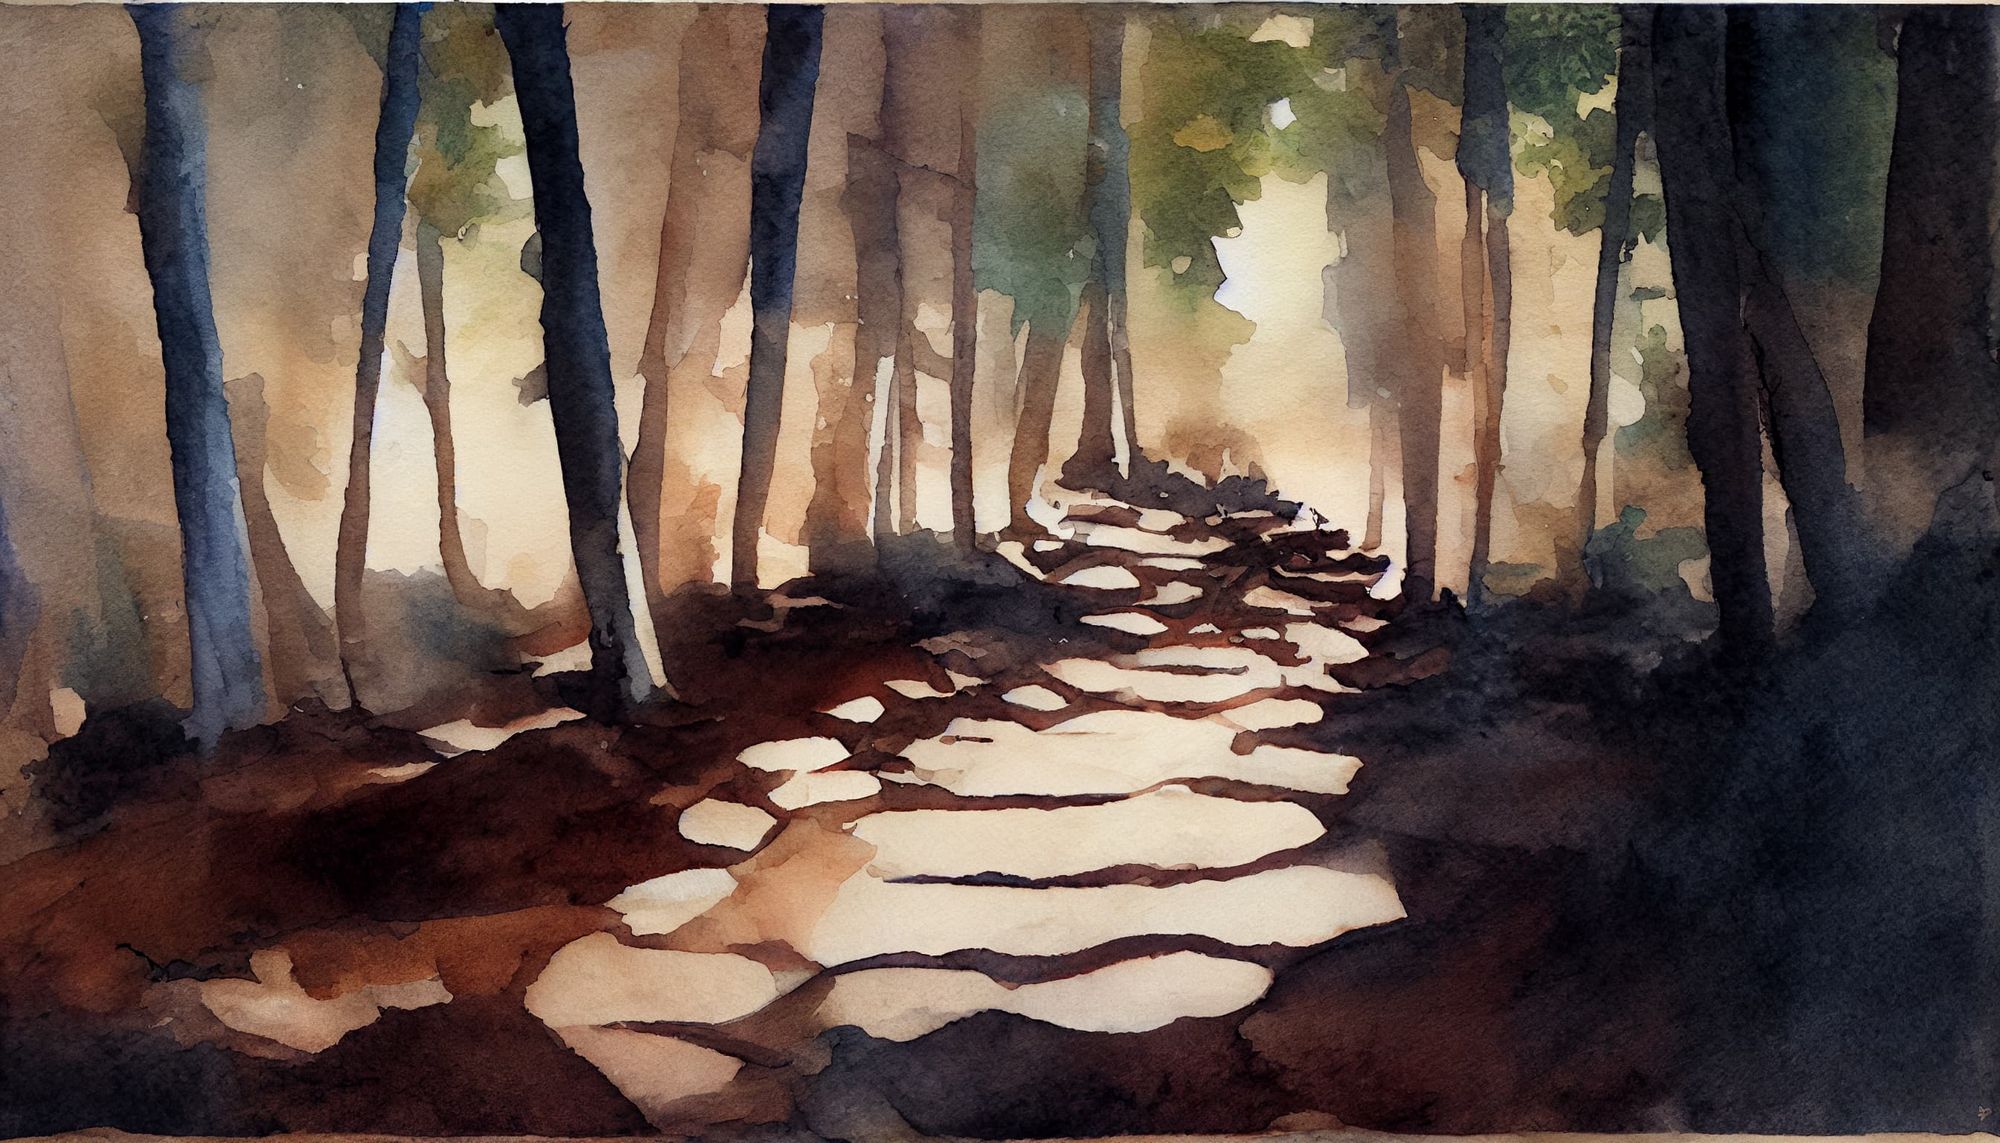 watercolor of a dirt path going through a forest full of shadows